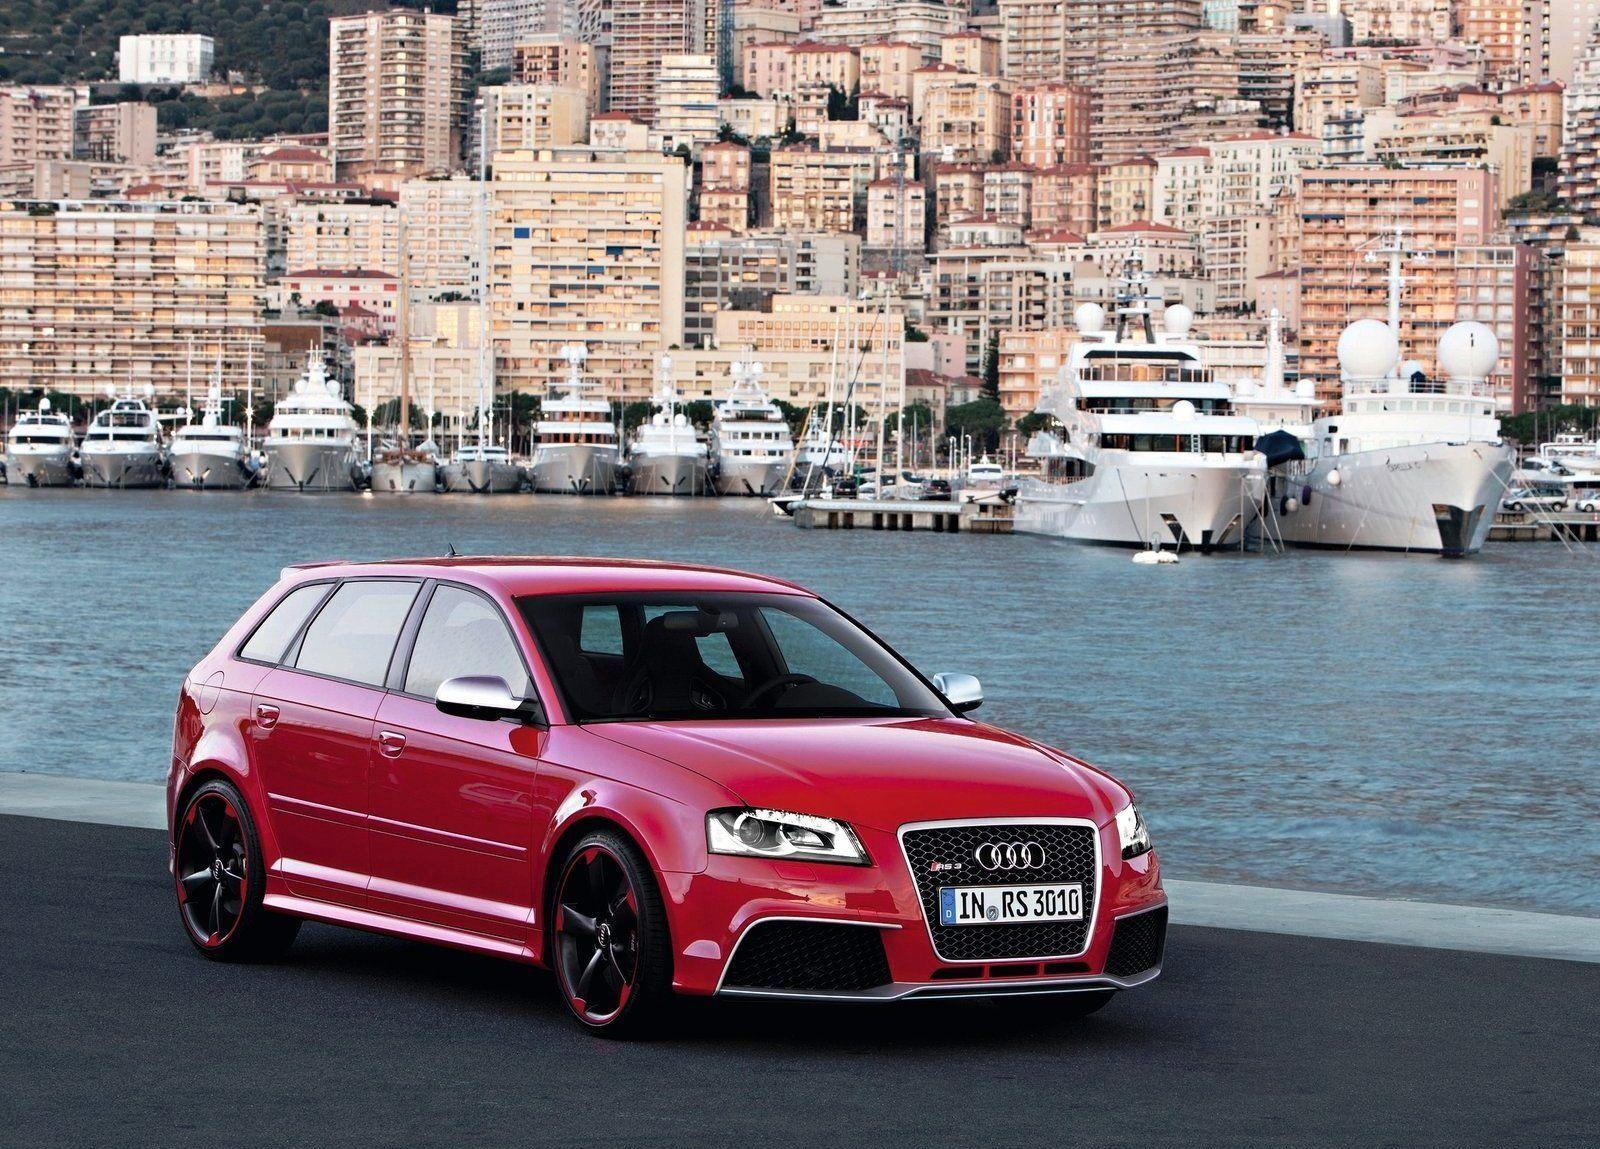 Audi RS3 Sportback Picture, Image